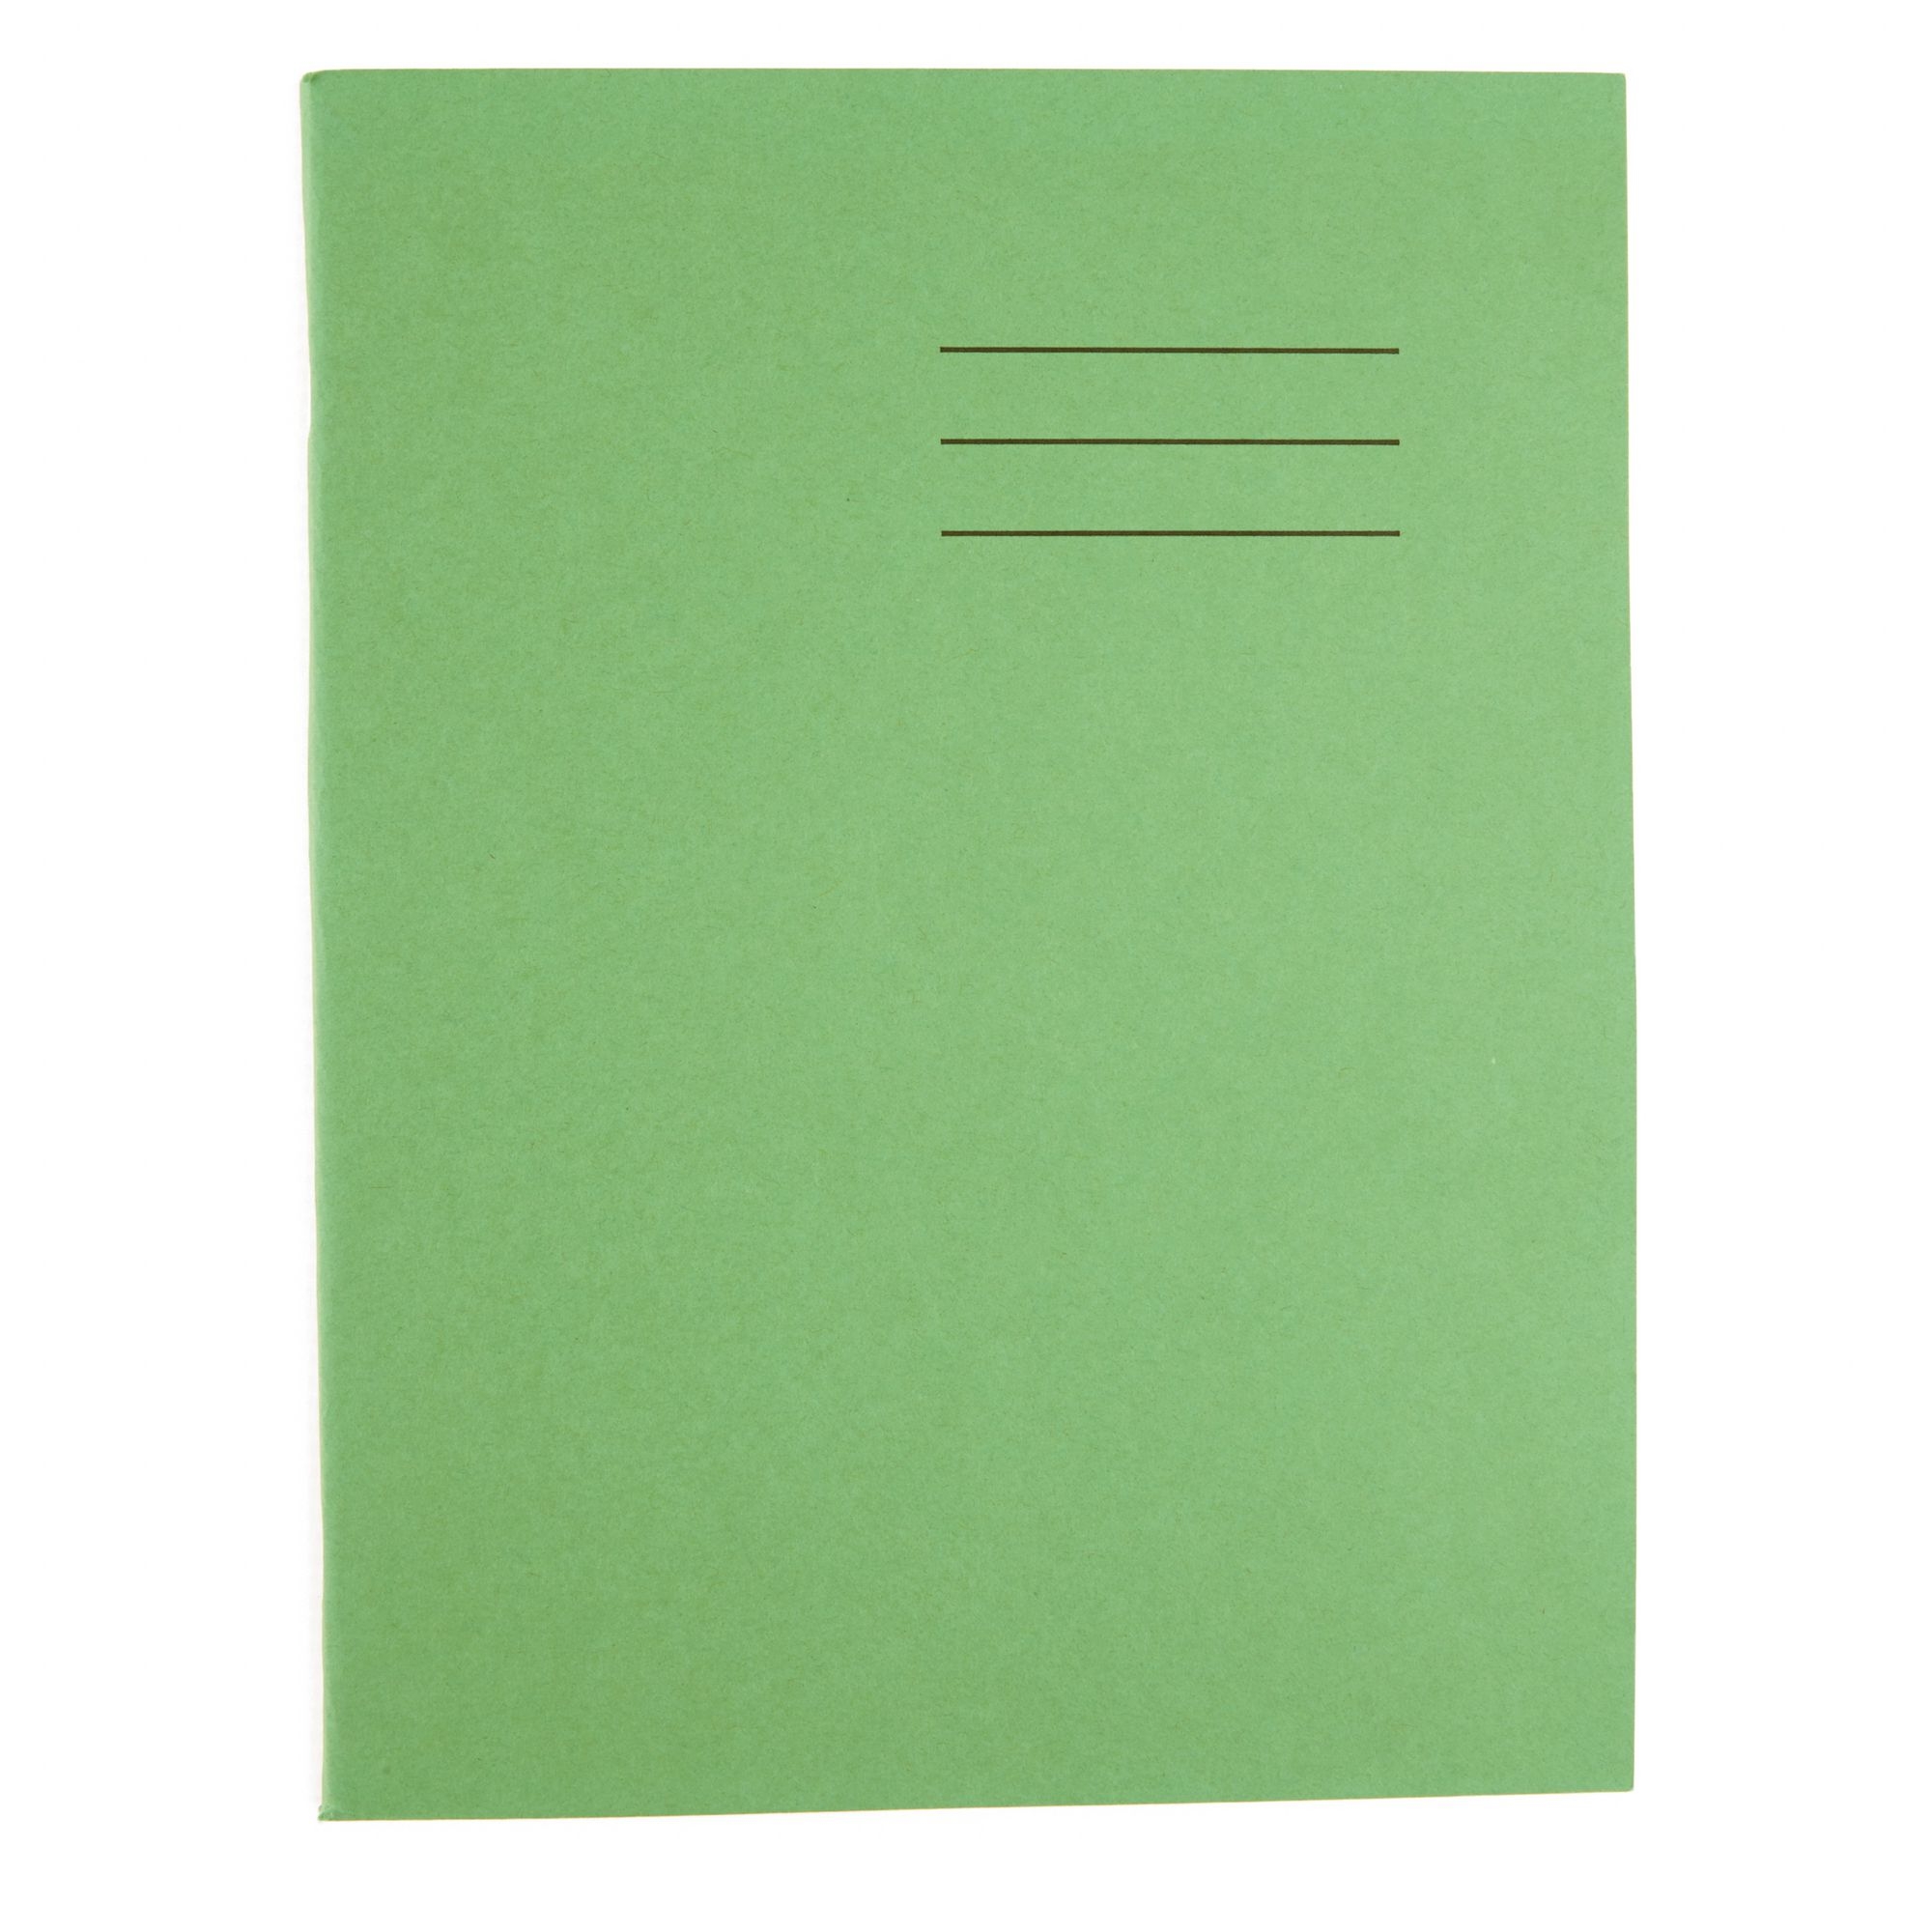 8x6.5 Exercise Book 80 Page, 10mm Squared, Light Green - Pack of 100